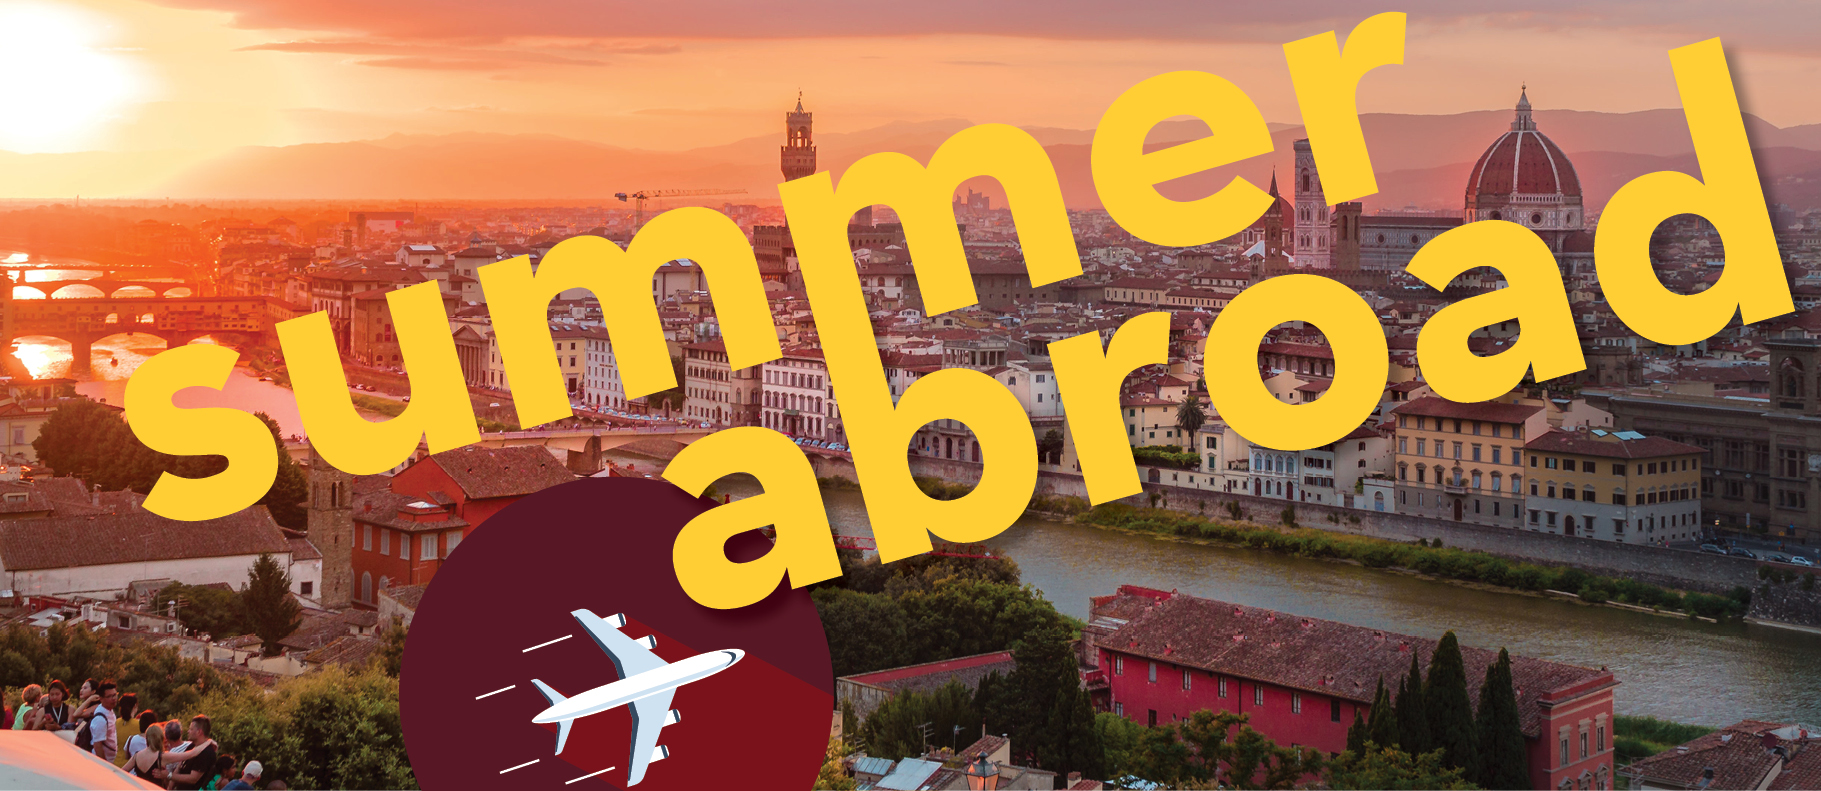 Study Abroad Graphic that says "Summer Abroad"